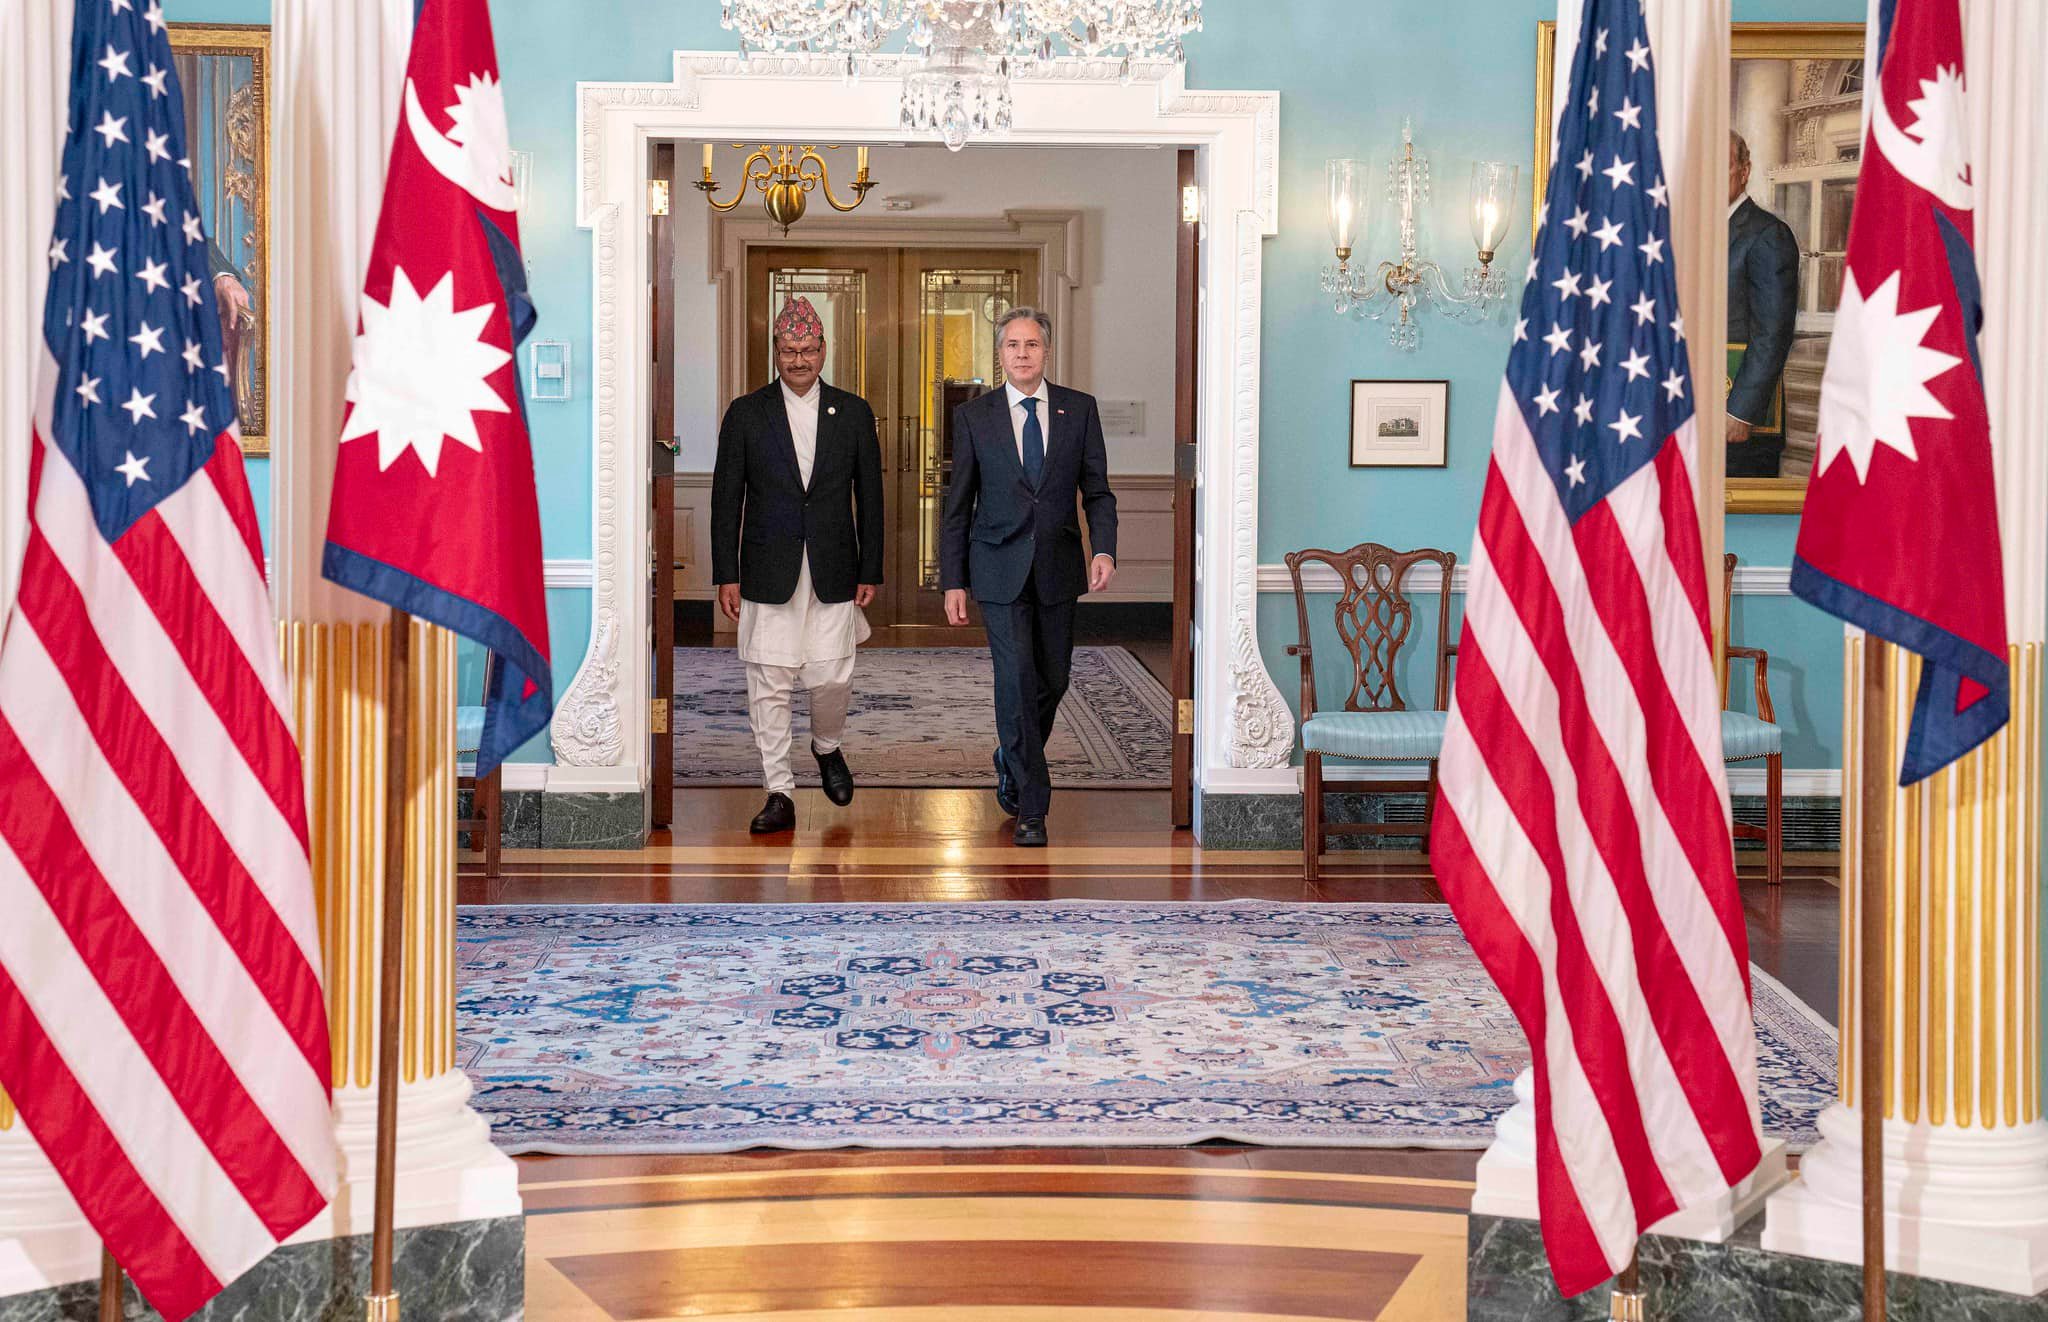 Meaningful partnership between the US and Nepal: Blinken